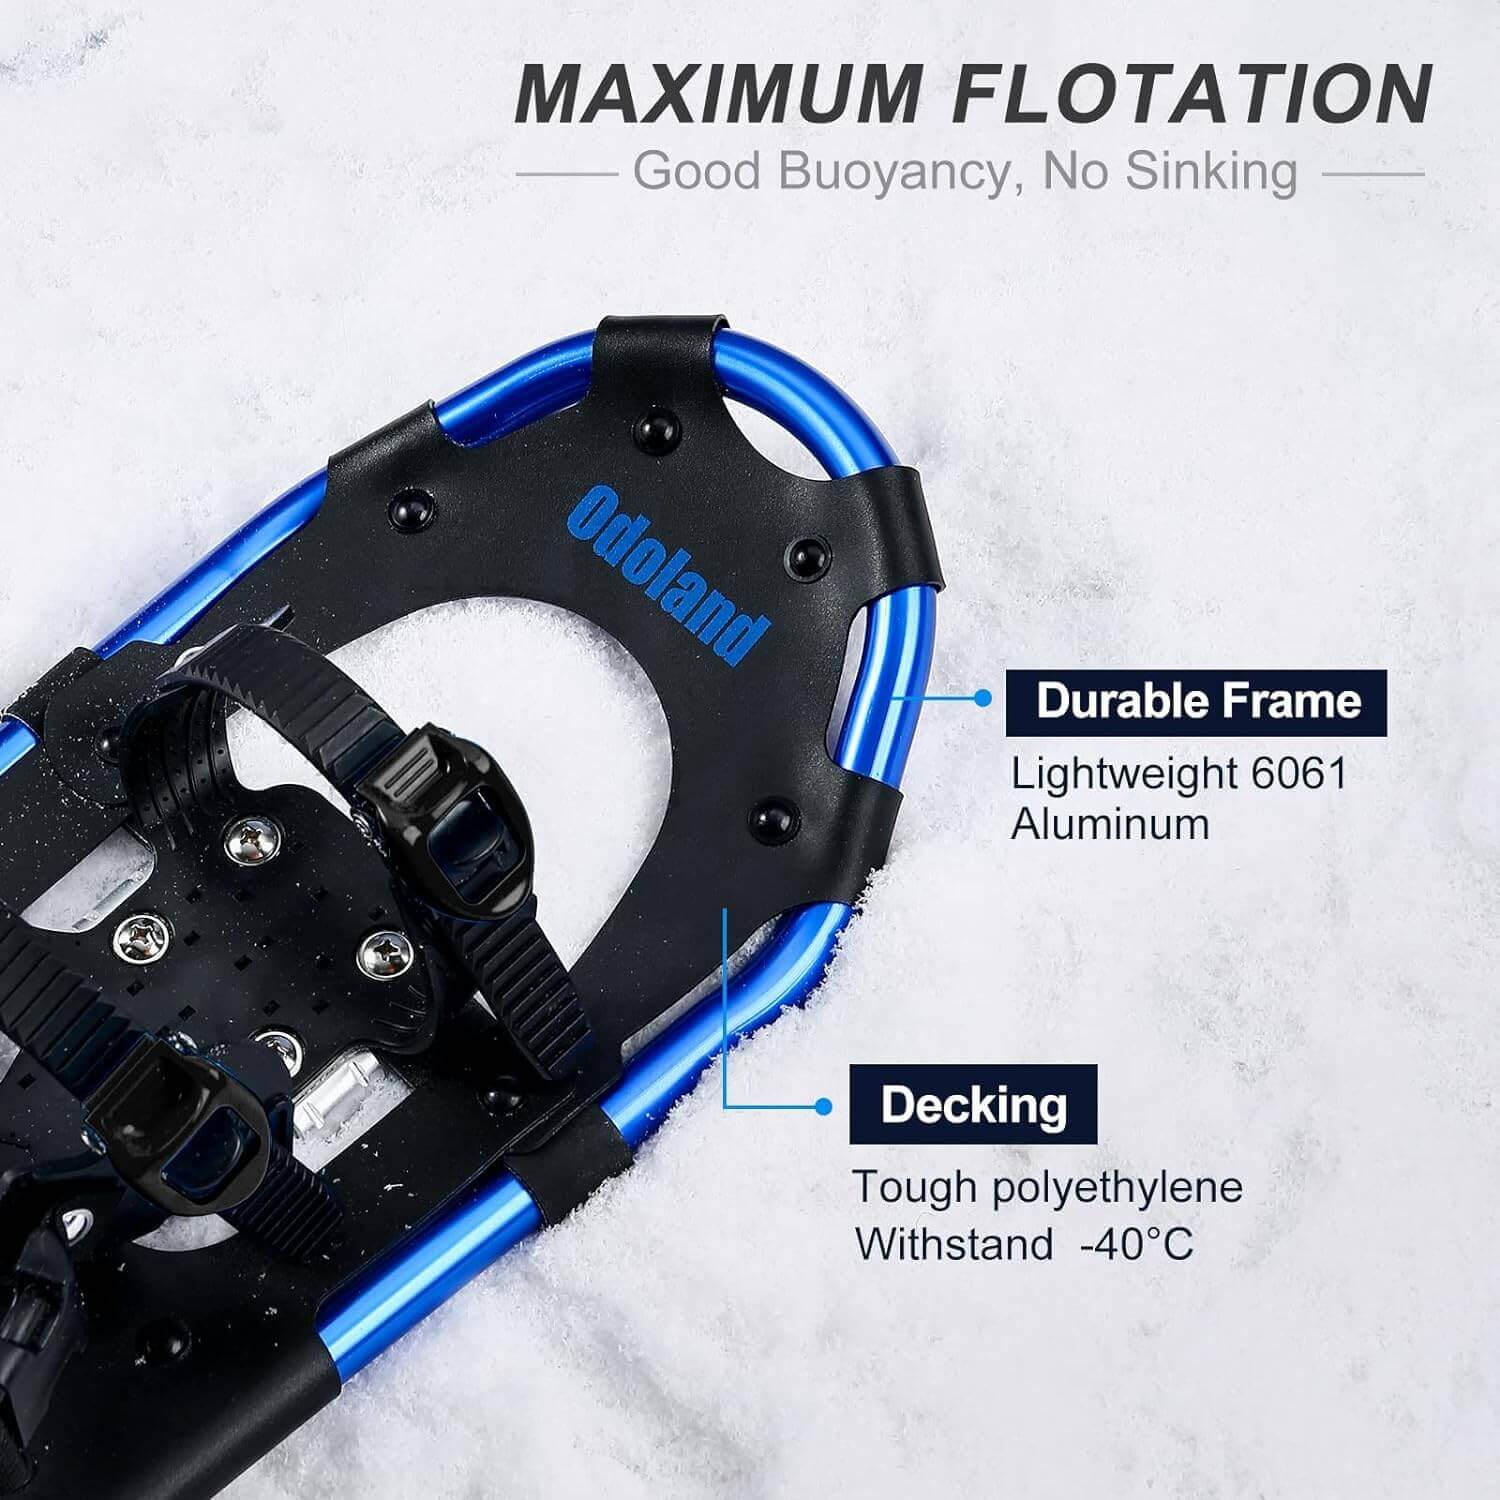 Shop The Latest >4-in-1 Snowshoes Set-Trekking Poles, Snow Leg Gaiters & Bag > *Only $117.44*> From The Top Brand > *Odolandl* > Shop Now and Get Free Shipping On Orders Over $45.00 >*Shop Earth Foot*